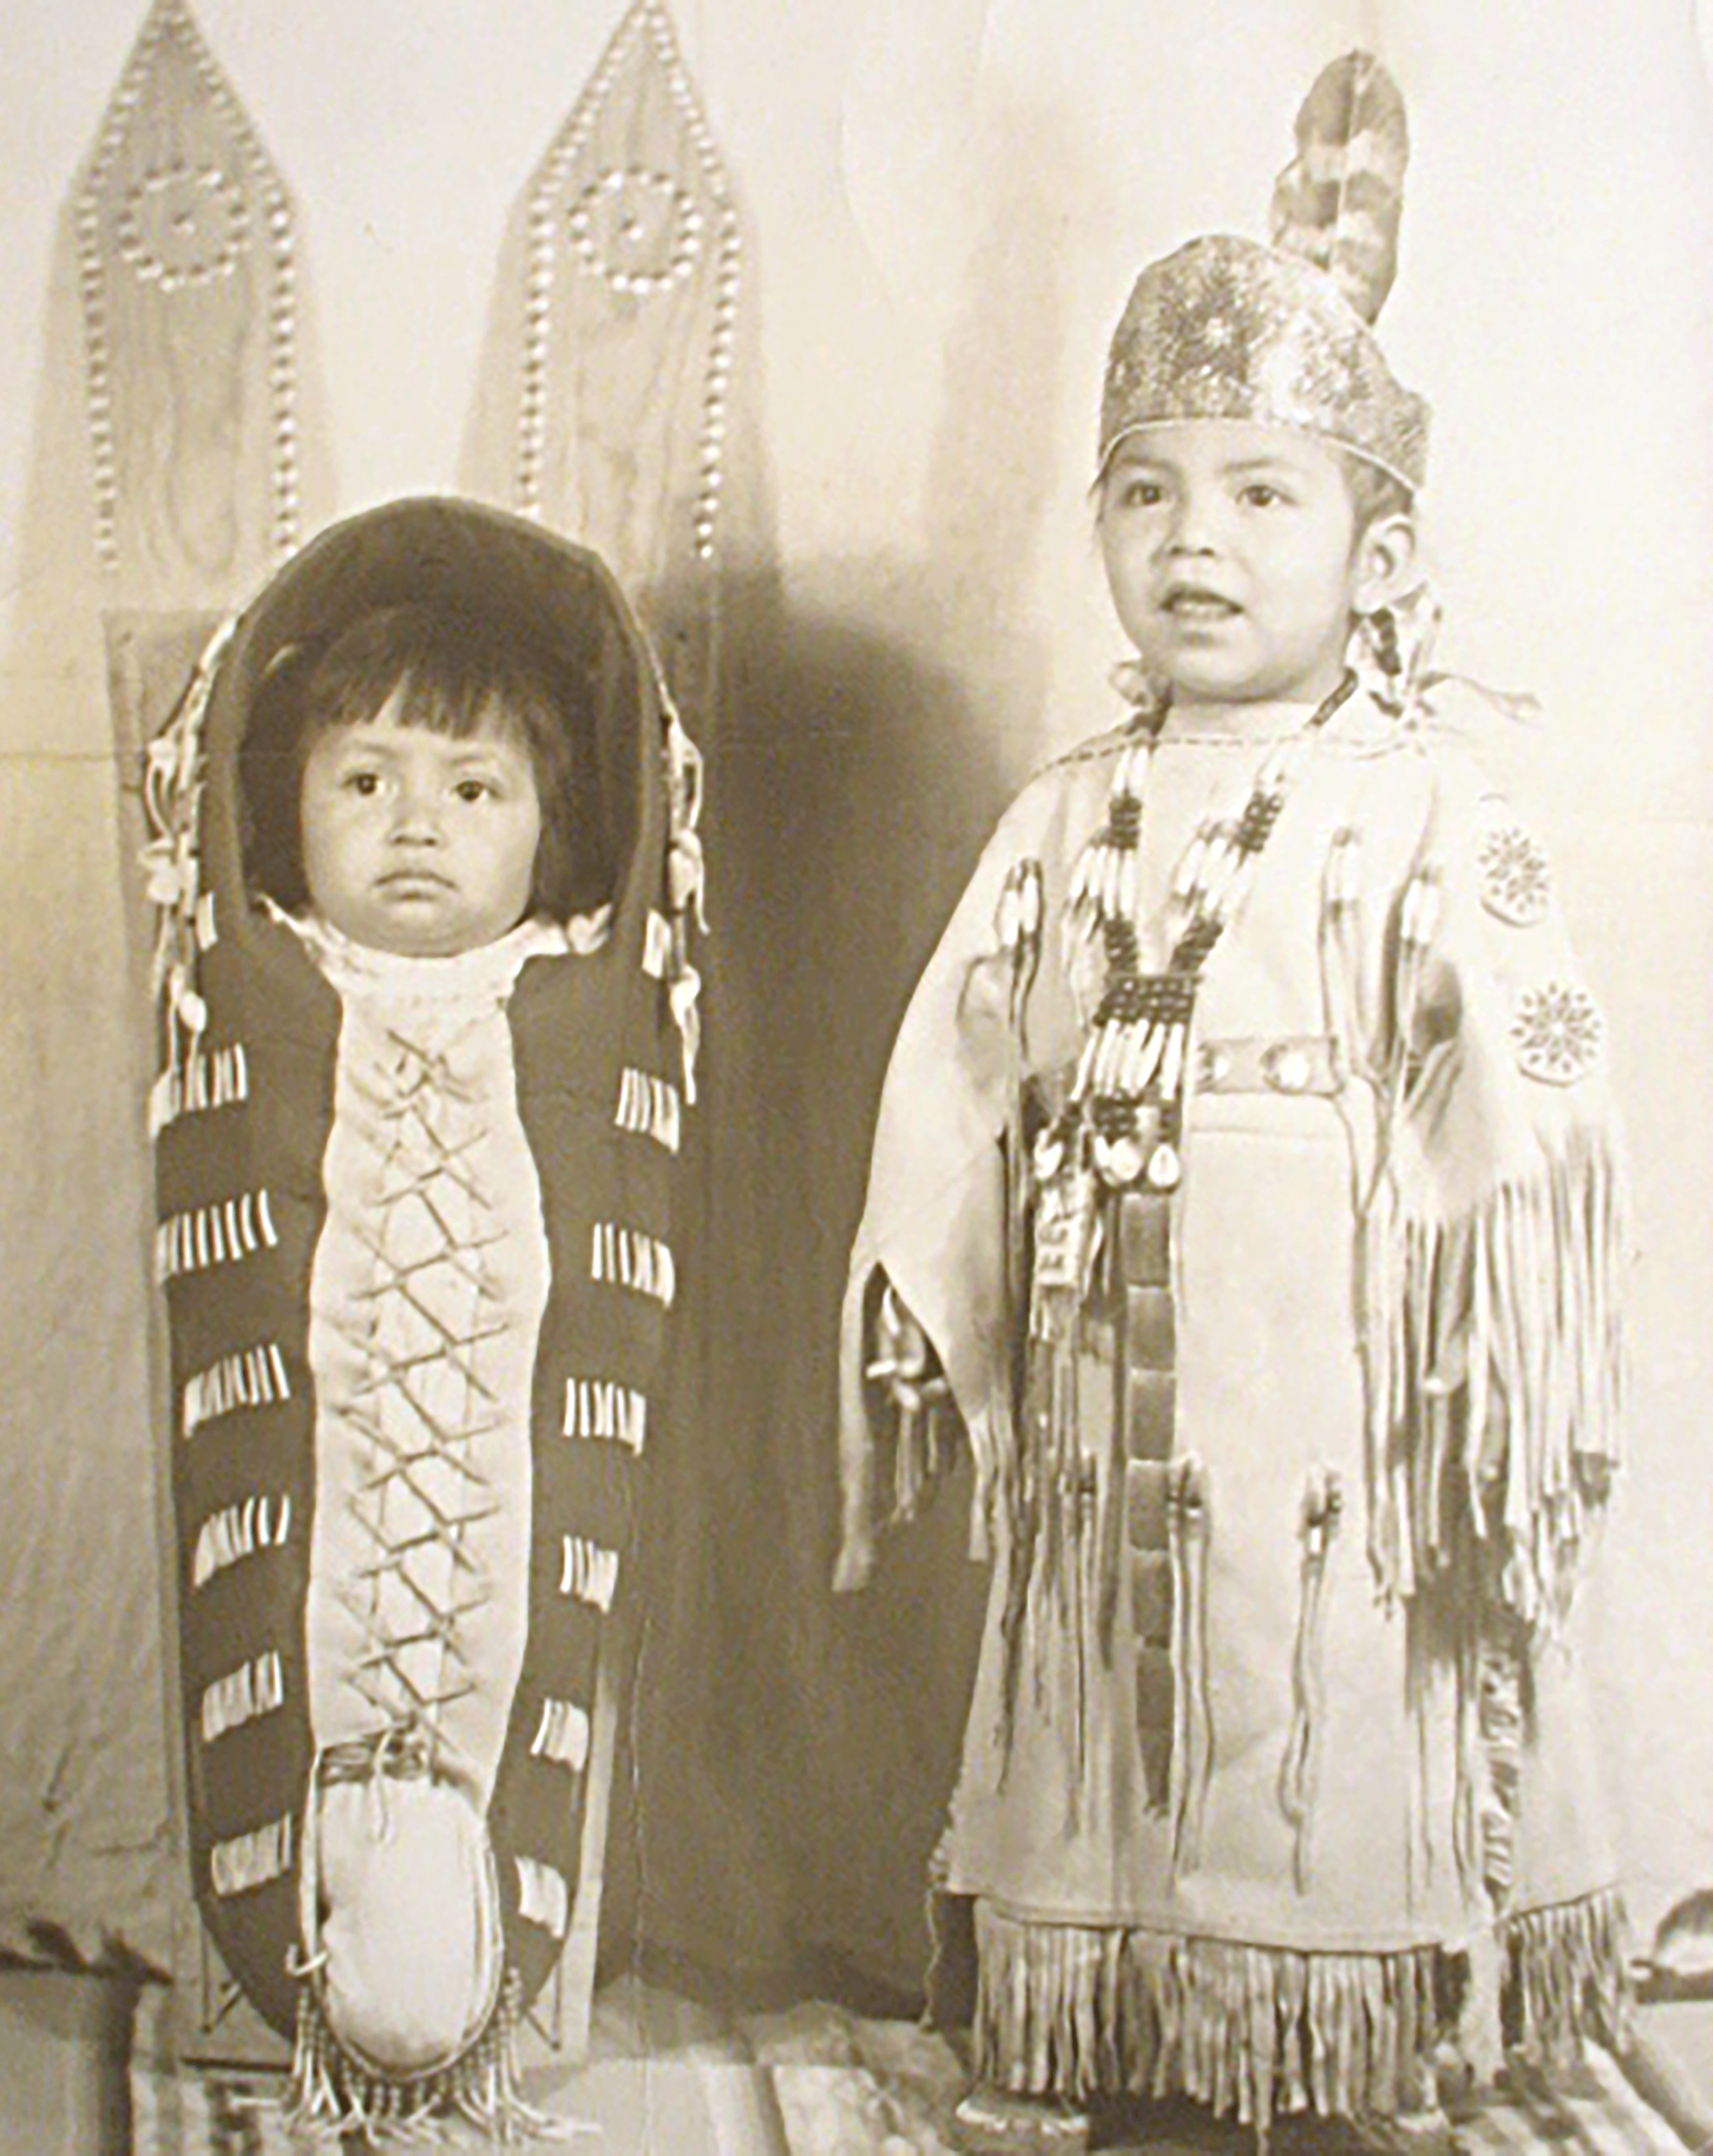 Black and white photo of two Indigenous children. A baby is laced into a carrier at left, and a toddler in a beaded buckskin dress stands at right.